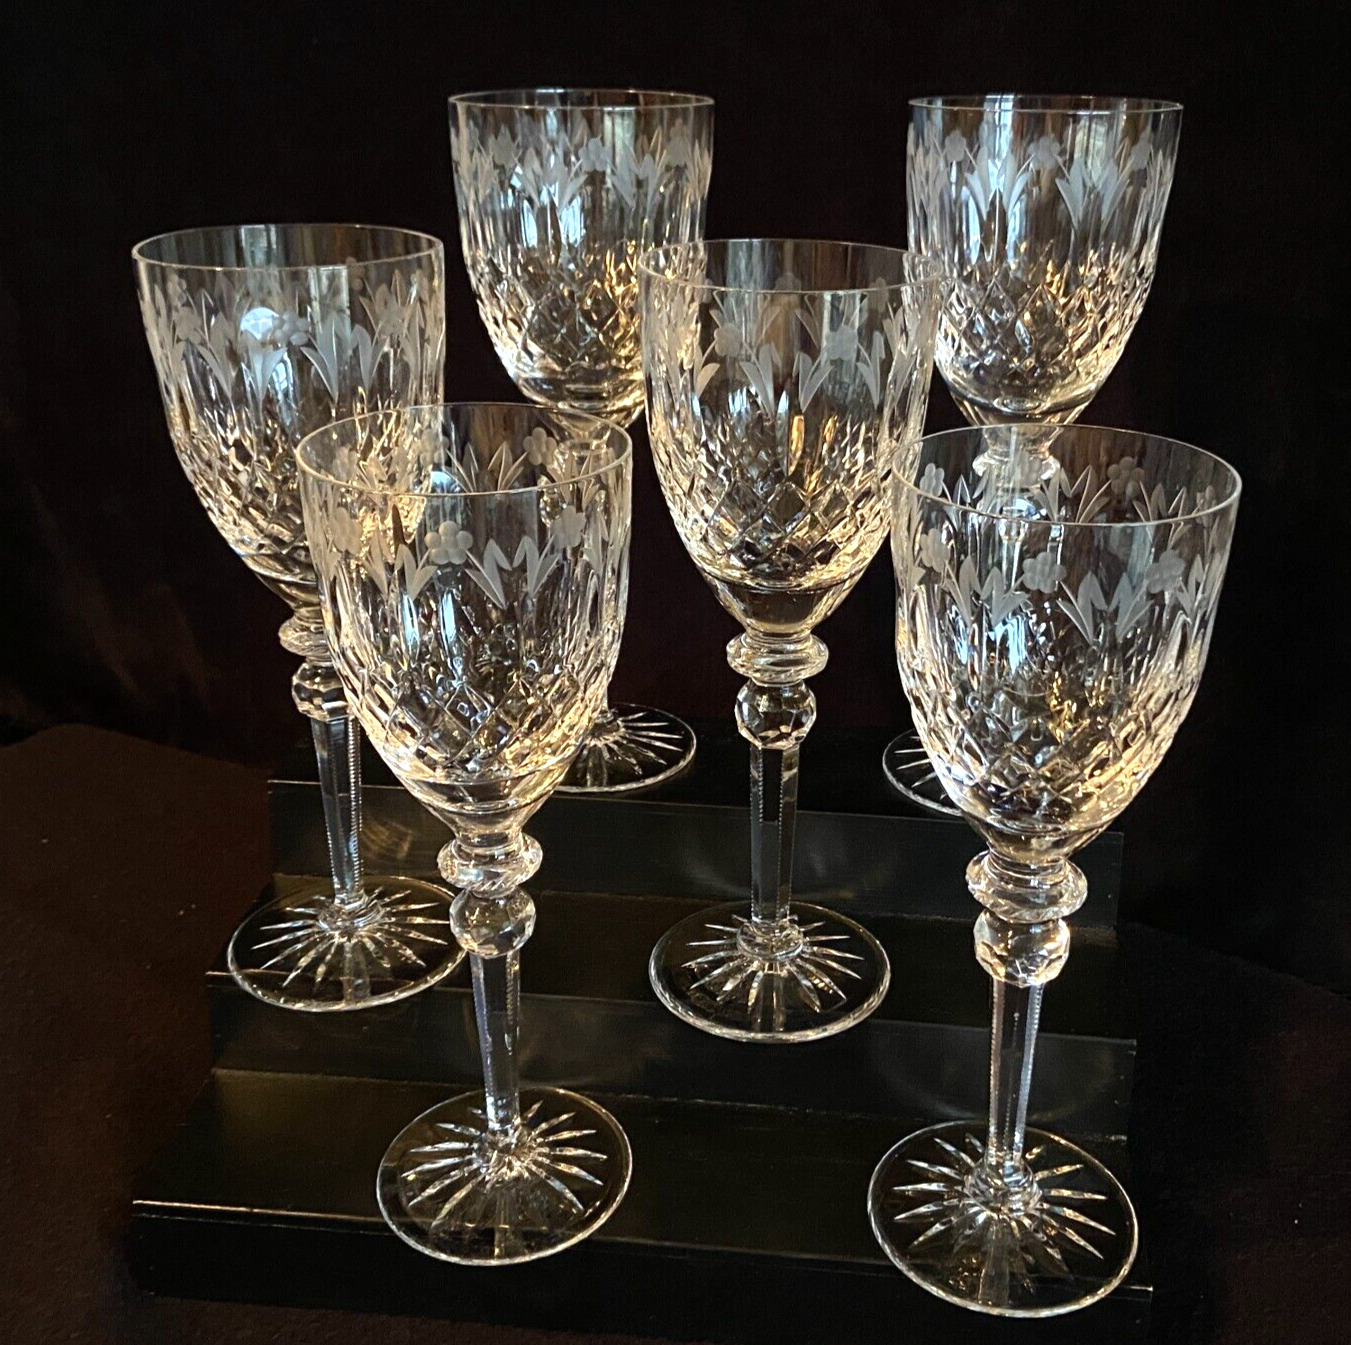 Set of (8) Rogaska  9 1/4” Crystal Water Goblets, “Queen” Gorgeous